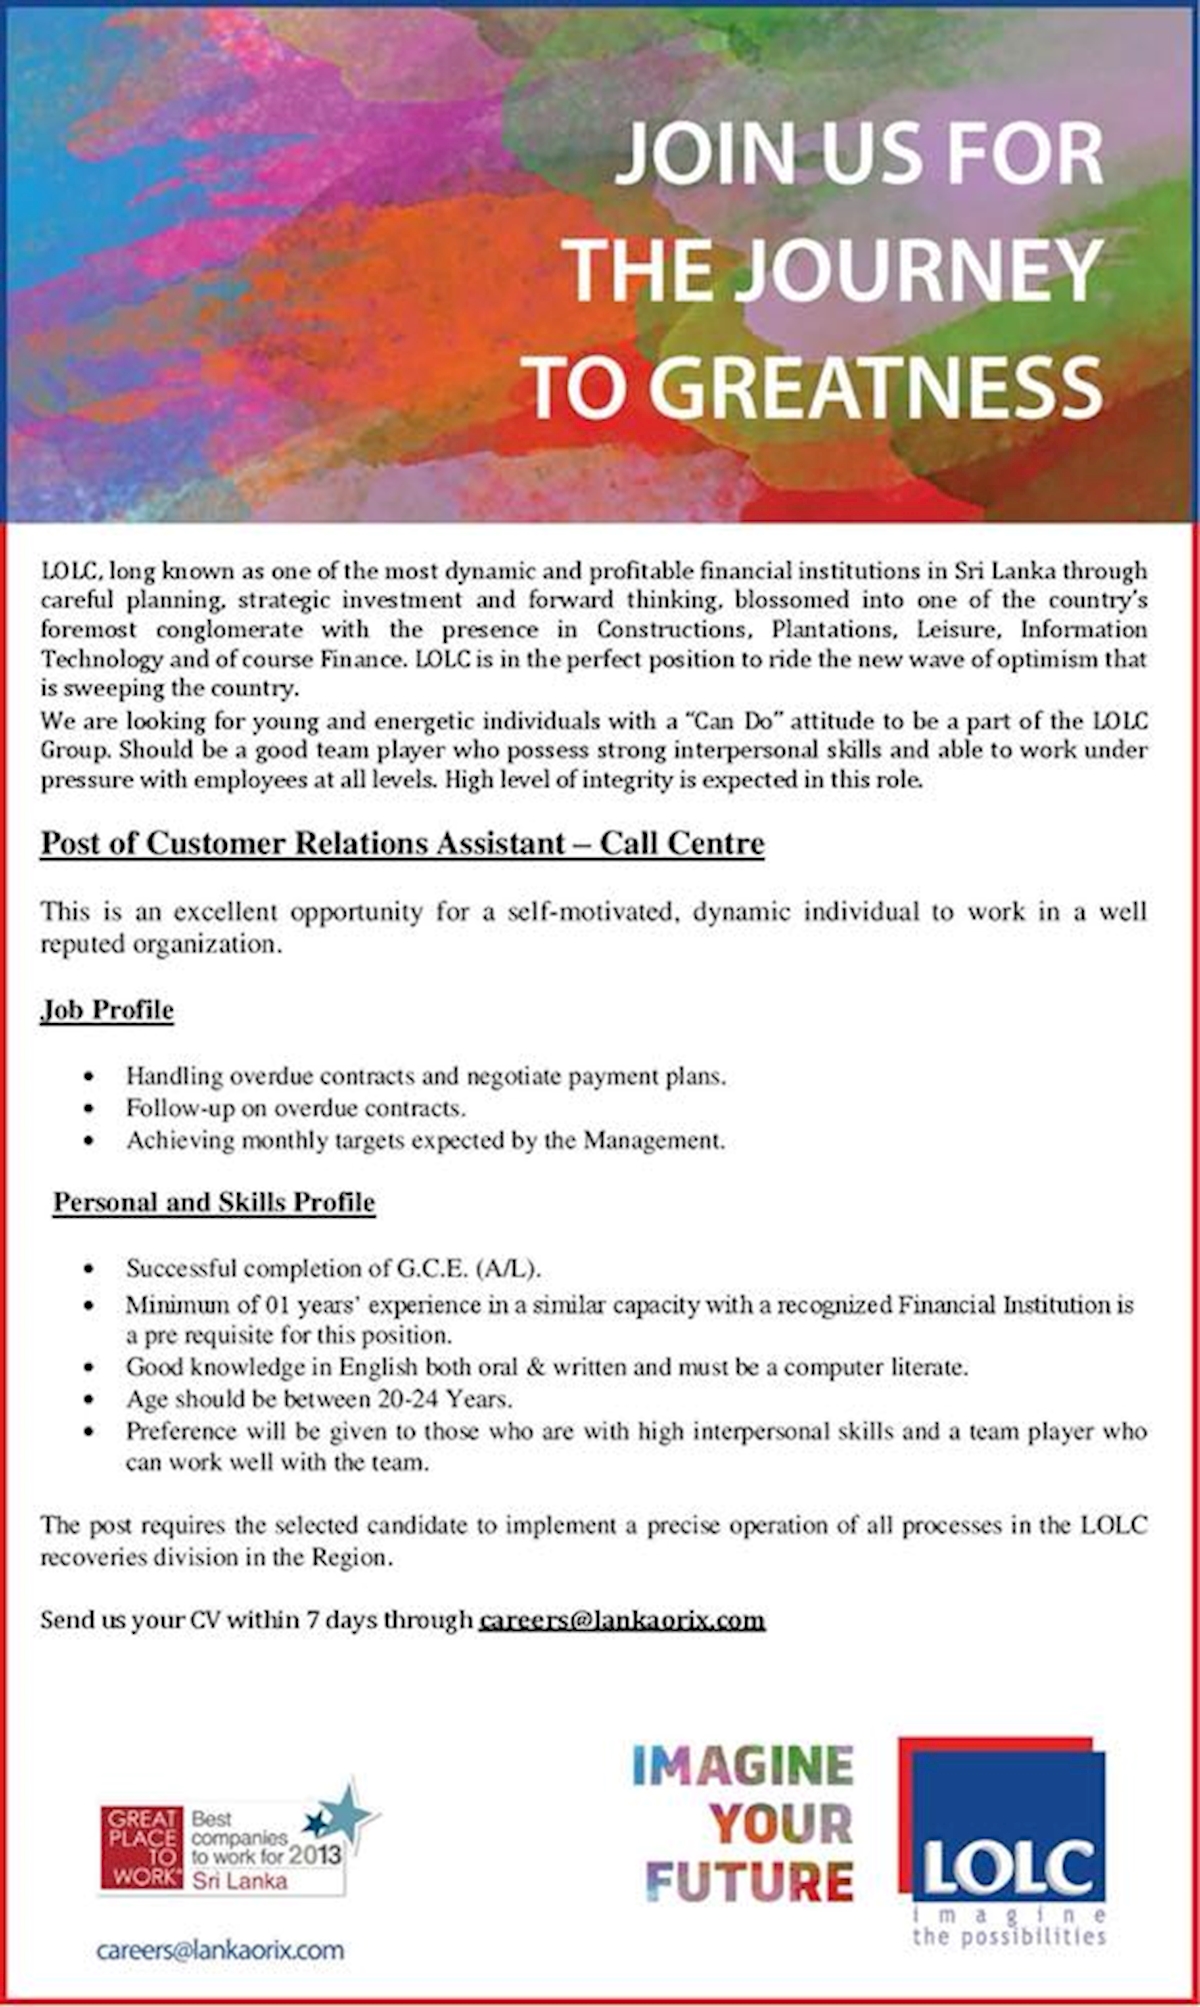 Post of Customer Relations Assistant - Call Centre